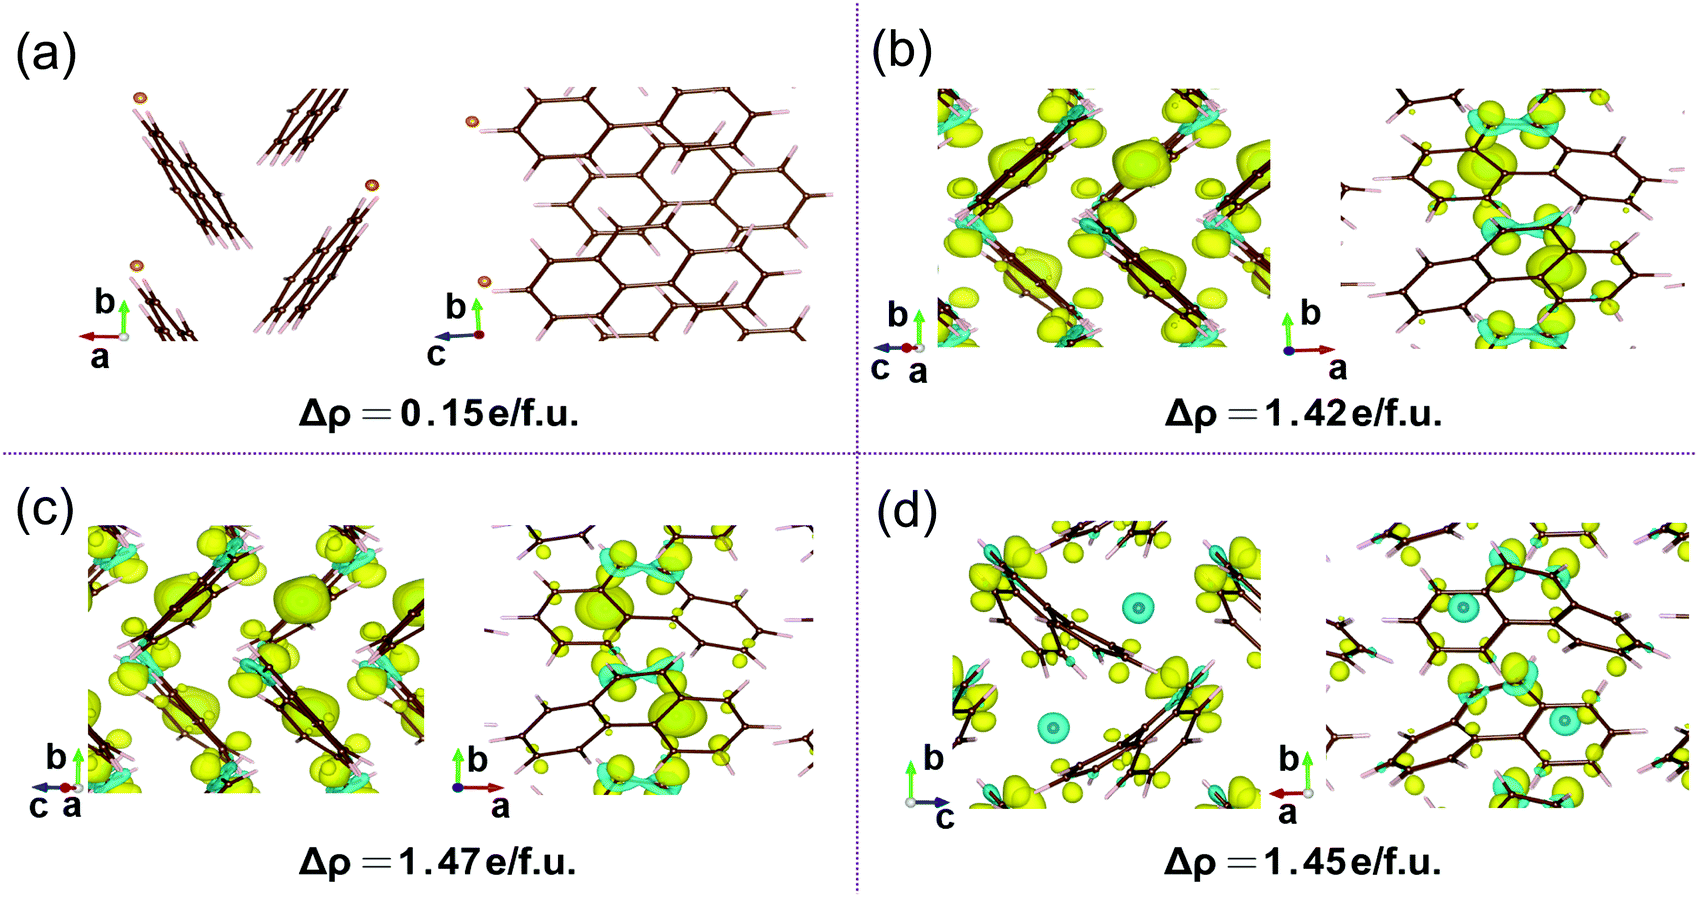 Structures Electronic Properties And Superconductivities Of Alkaline Earth Metal Doped Phenanthrene And Charge Transfer Characteristics Of Metal Doped Phenanthrene Physical Chemistry Chemical Physics Rsc Publishing